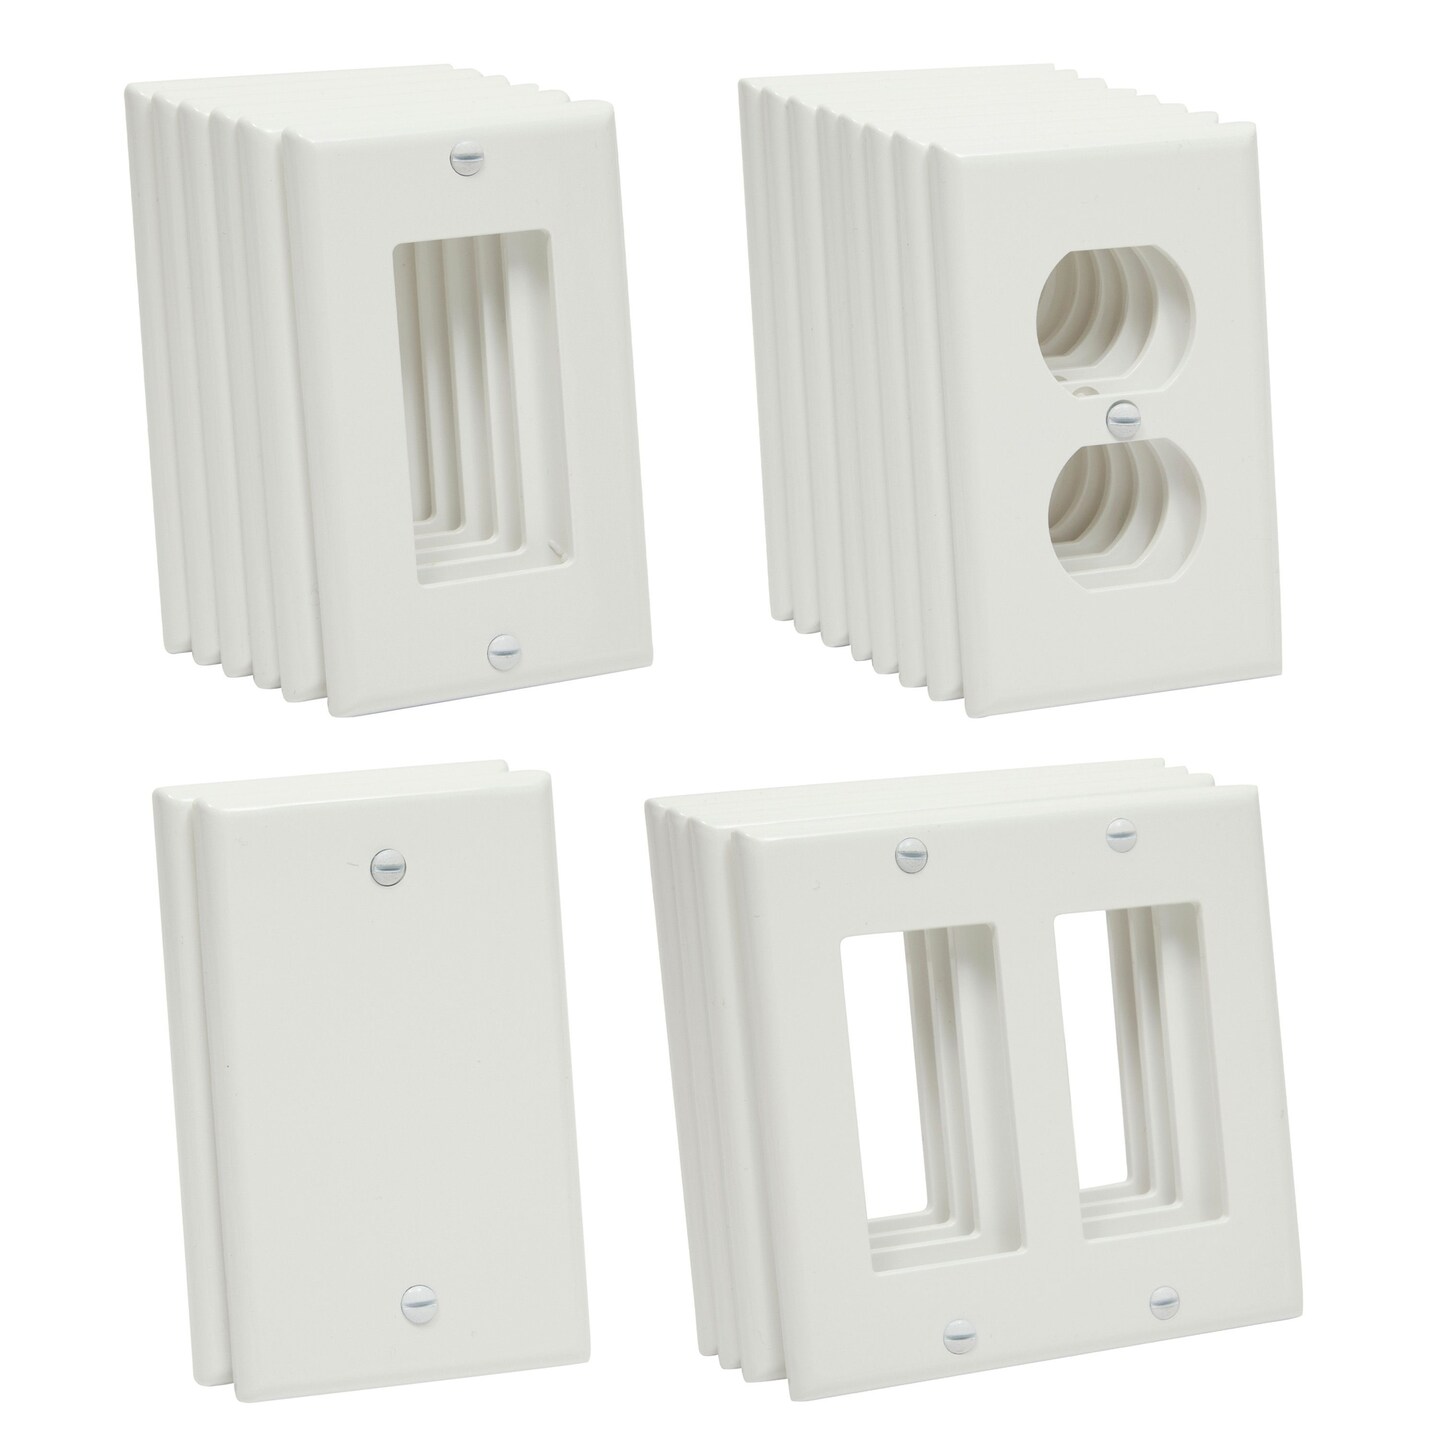 Wall Cover Plate, 1 Gang GFCI, White Plastic, 1 Pack. In Stock